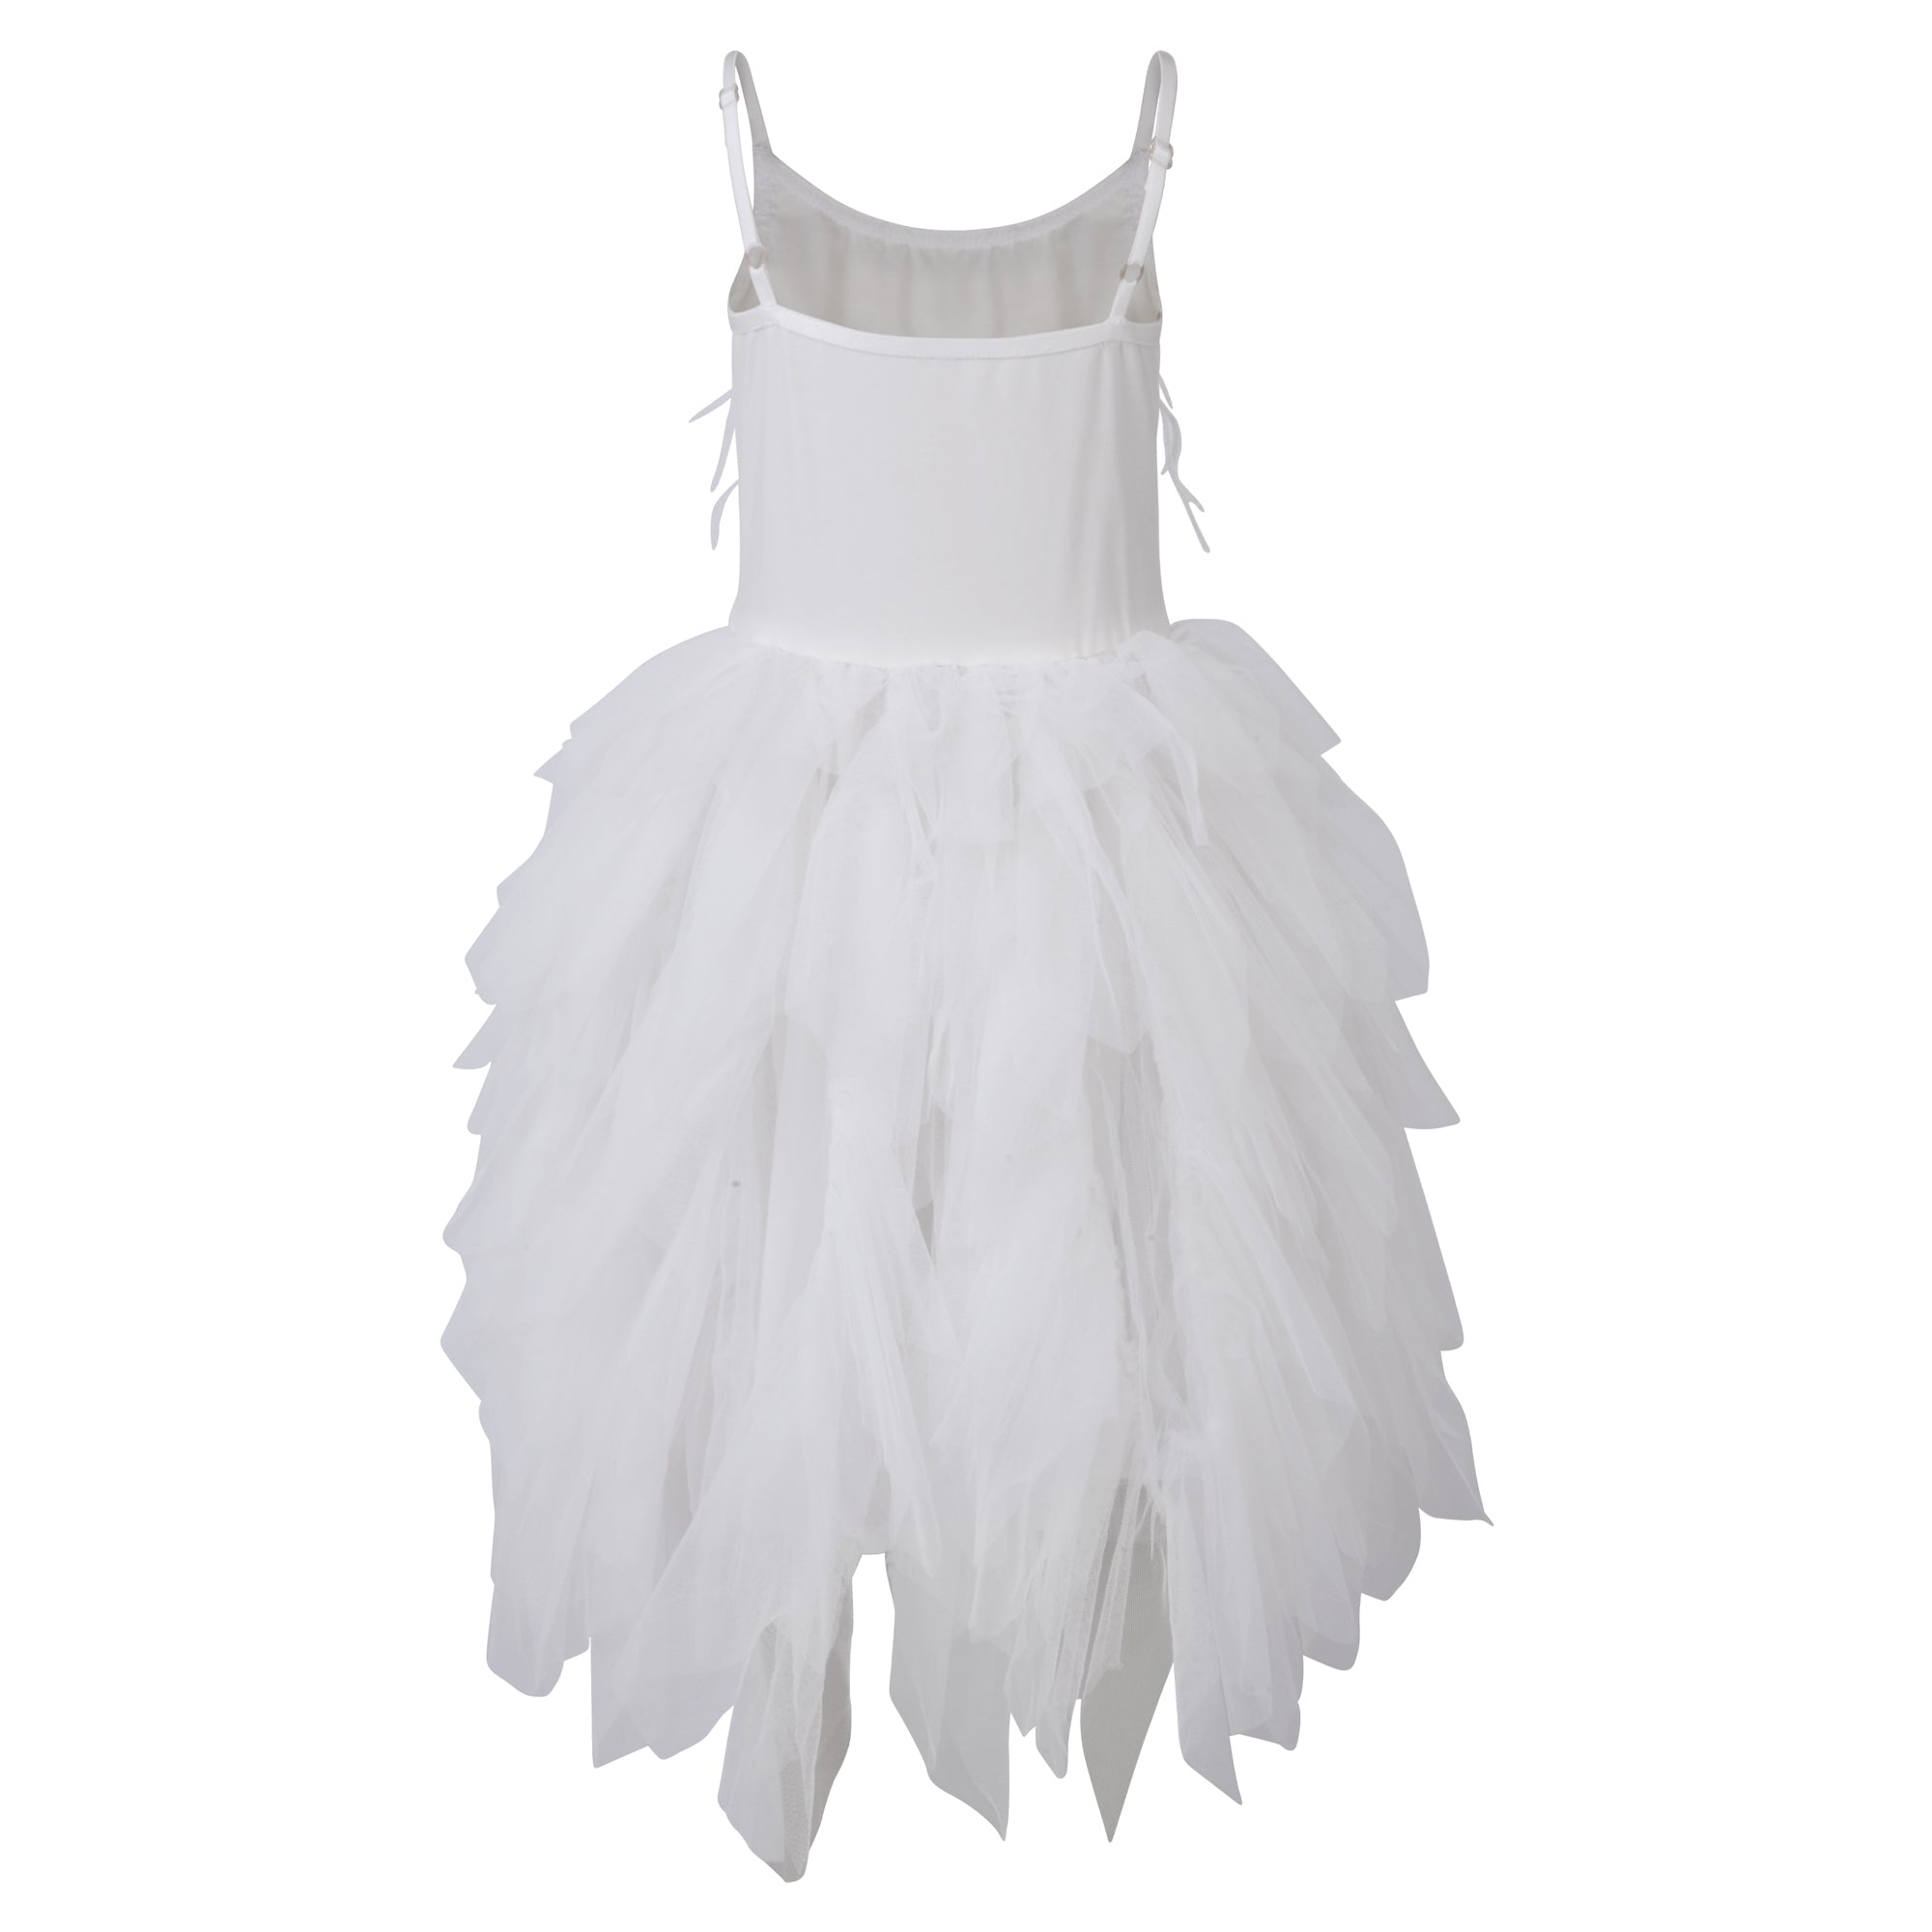 Girls white Frilly and Feathers Dress